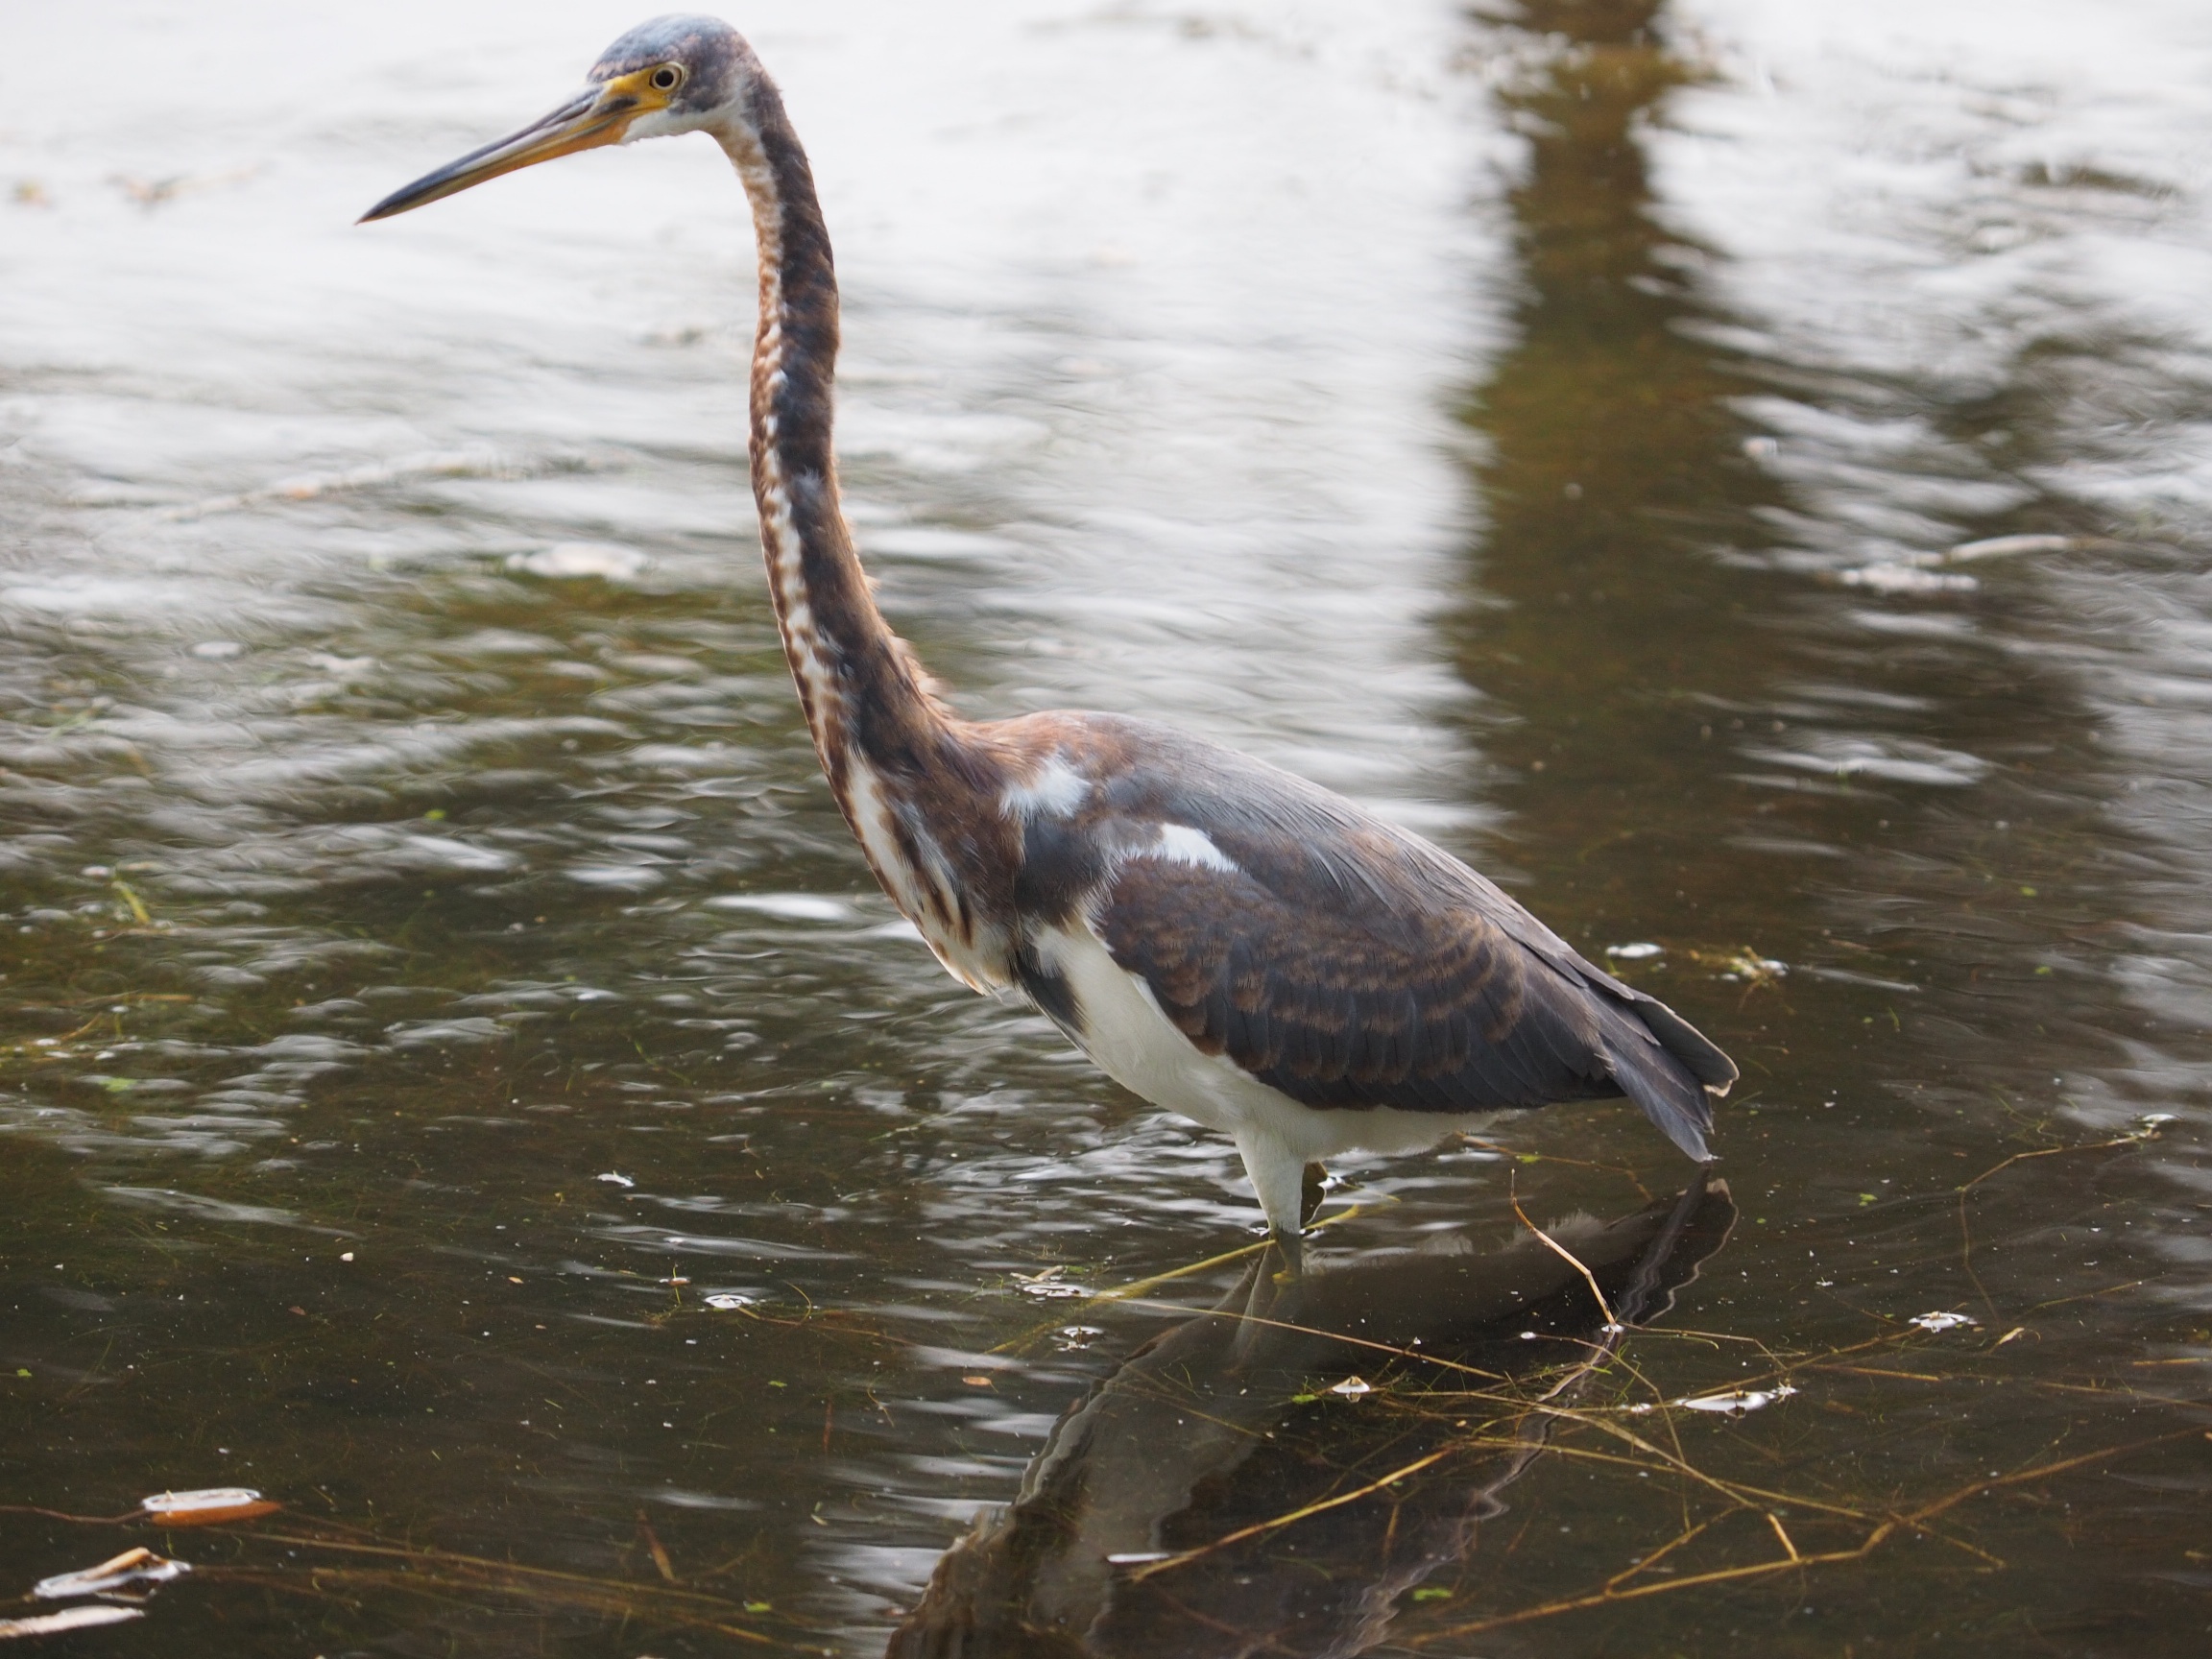 Photograph of a Tricolored Heron